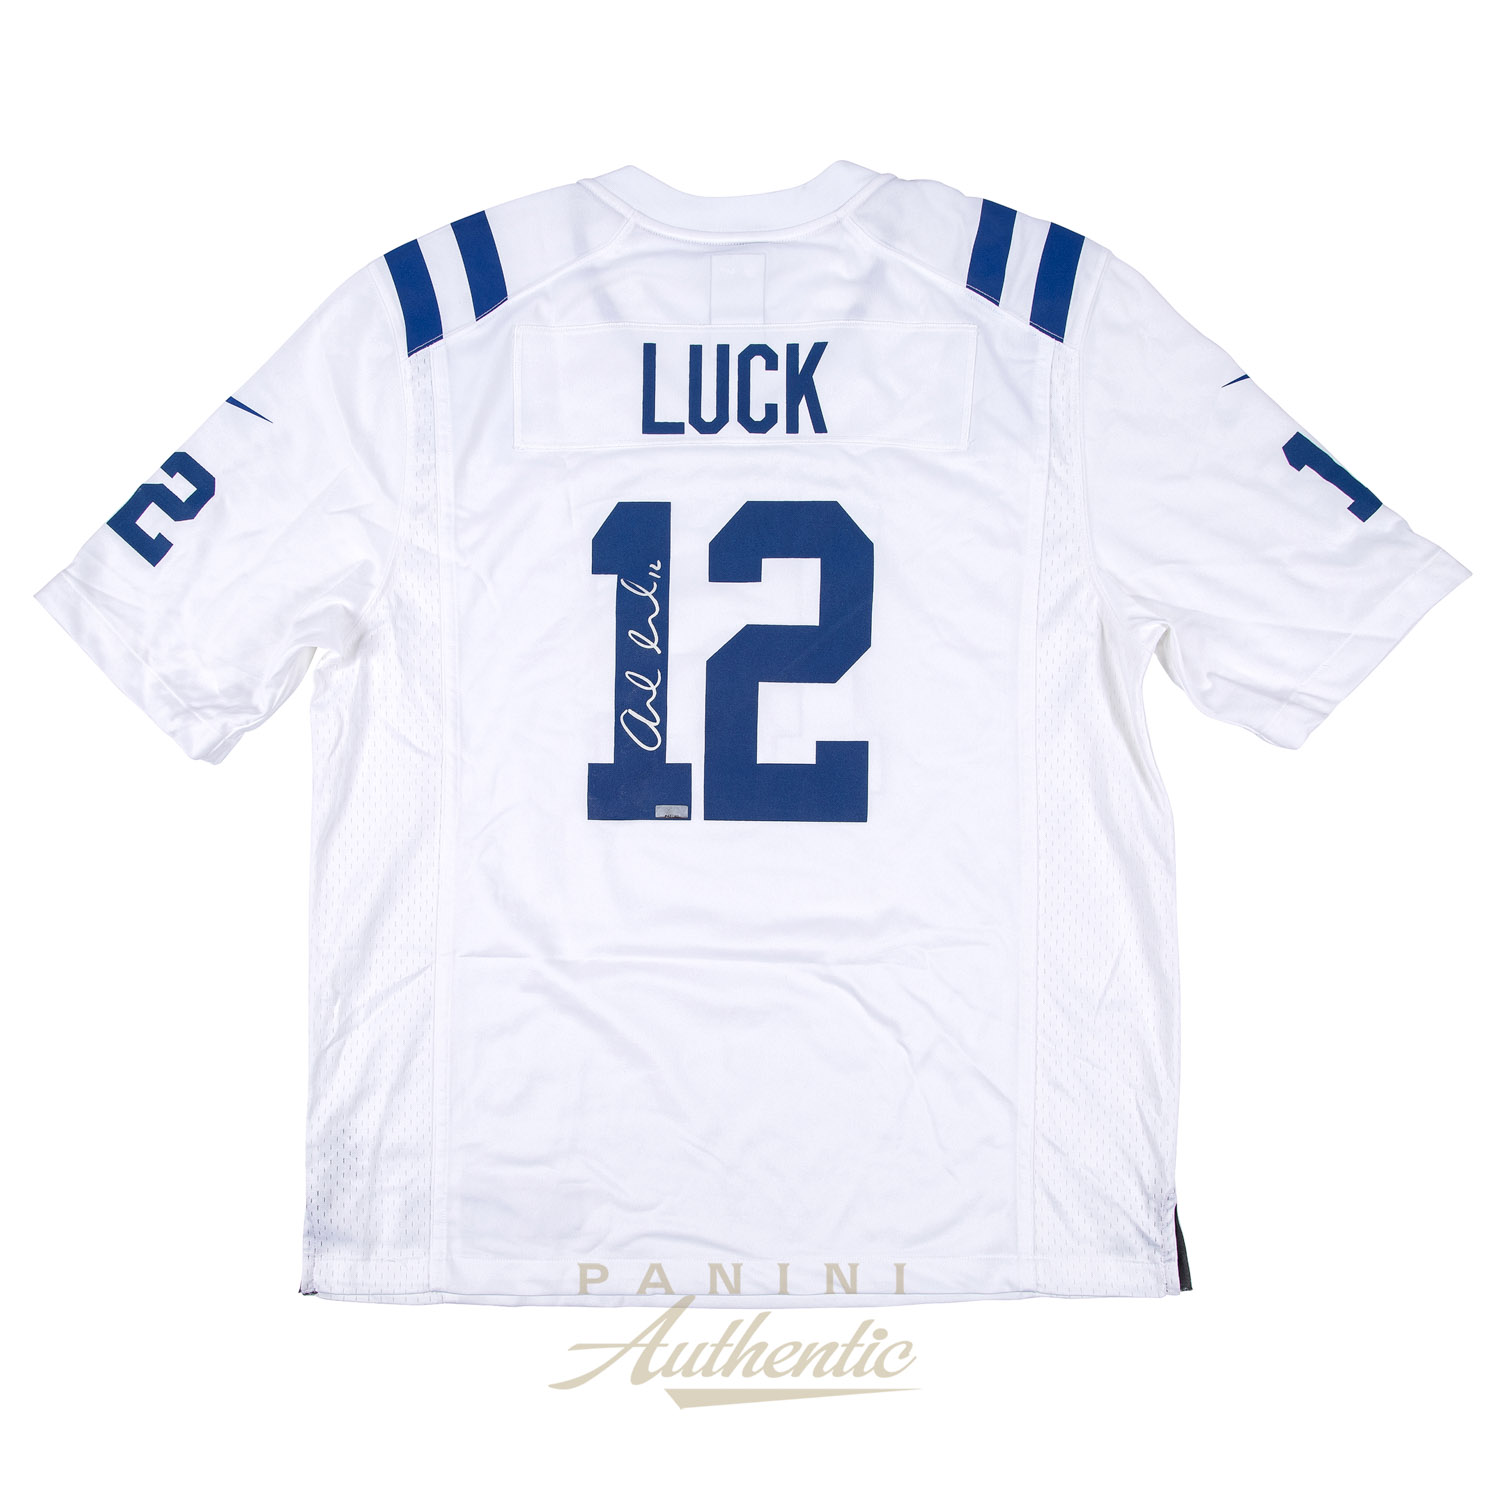 andrew luck authentic jersey